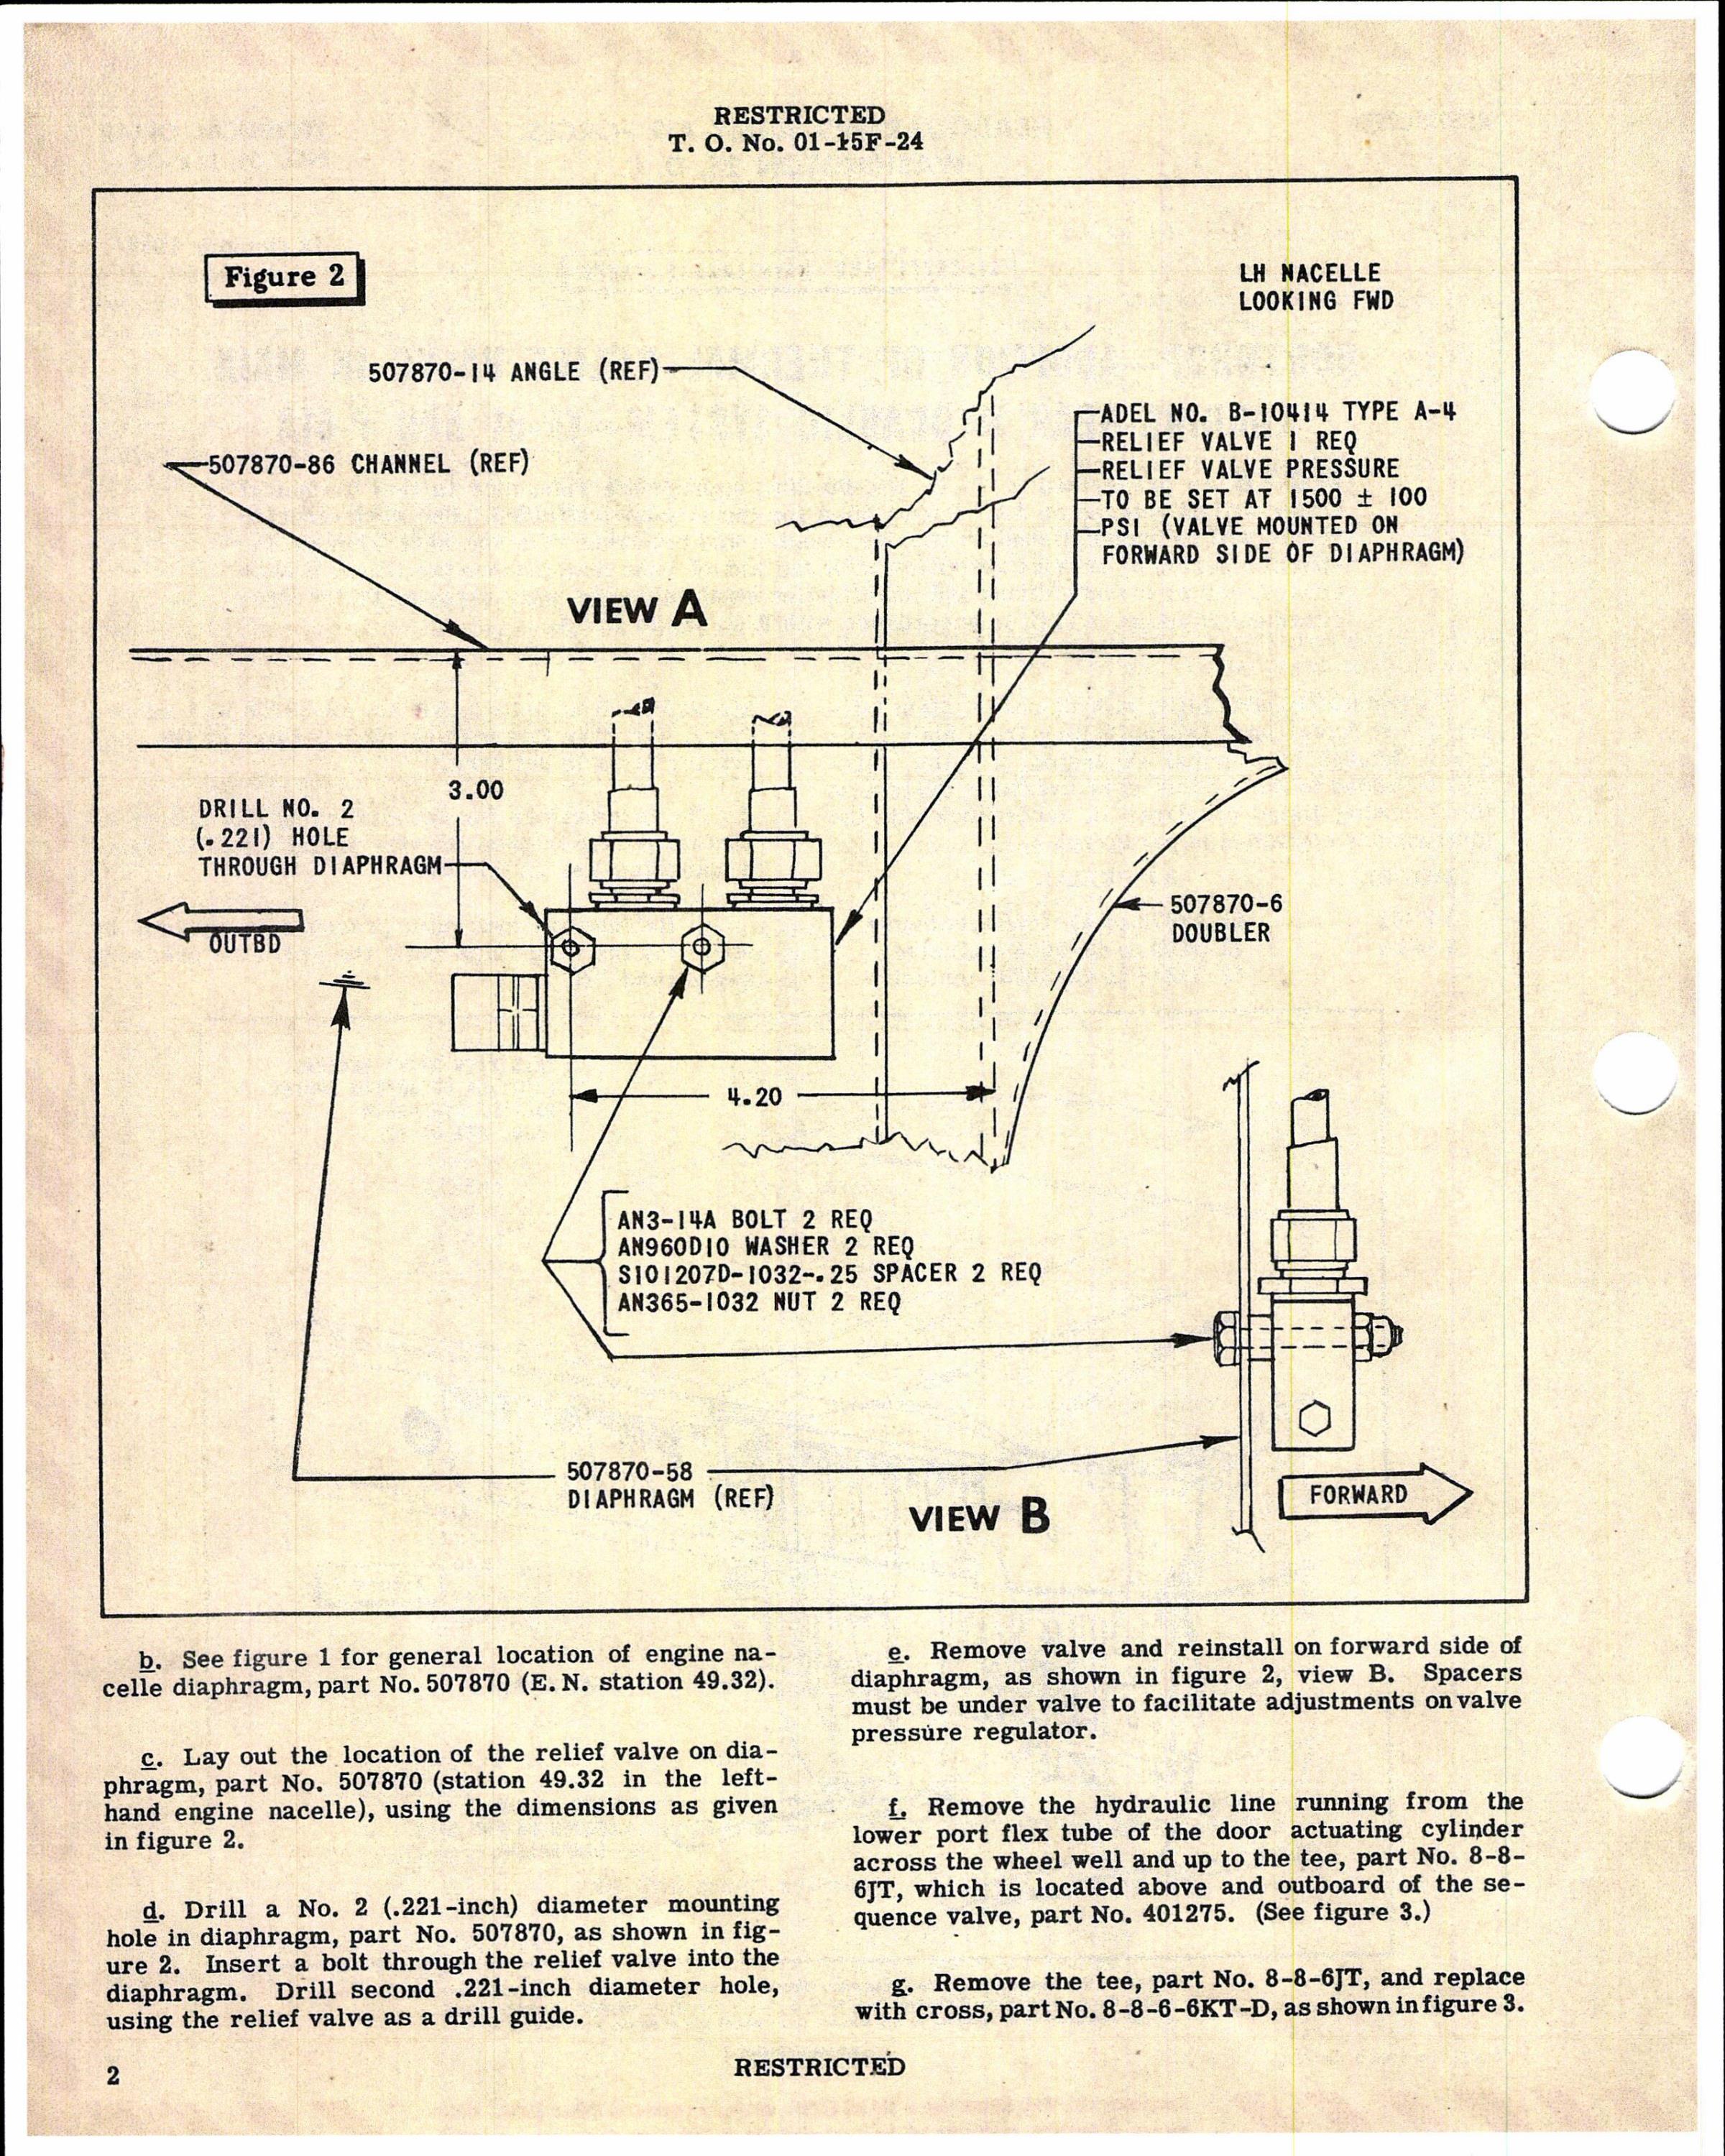 Sample page 2 from AirCorps Library document: Thermal Relief Valve in Main Landing Gear Hydraulic System